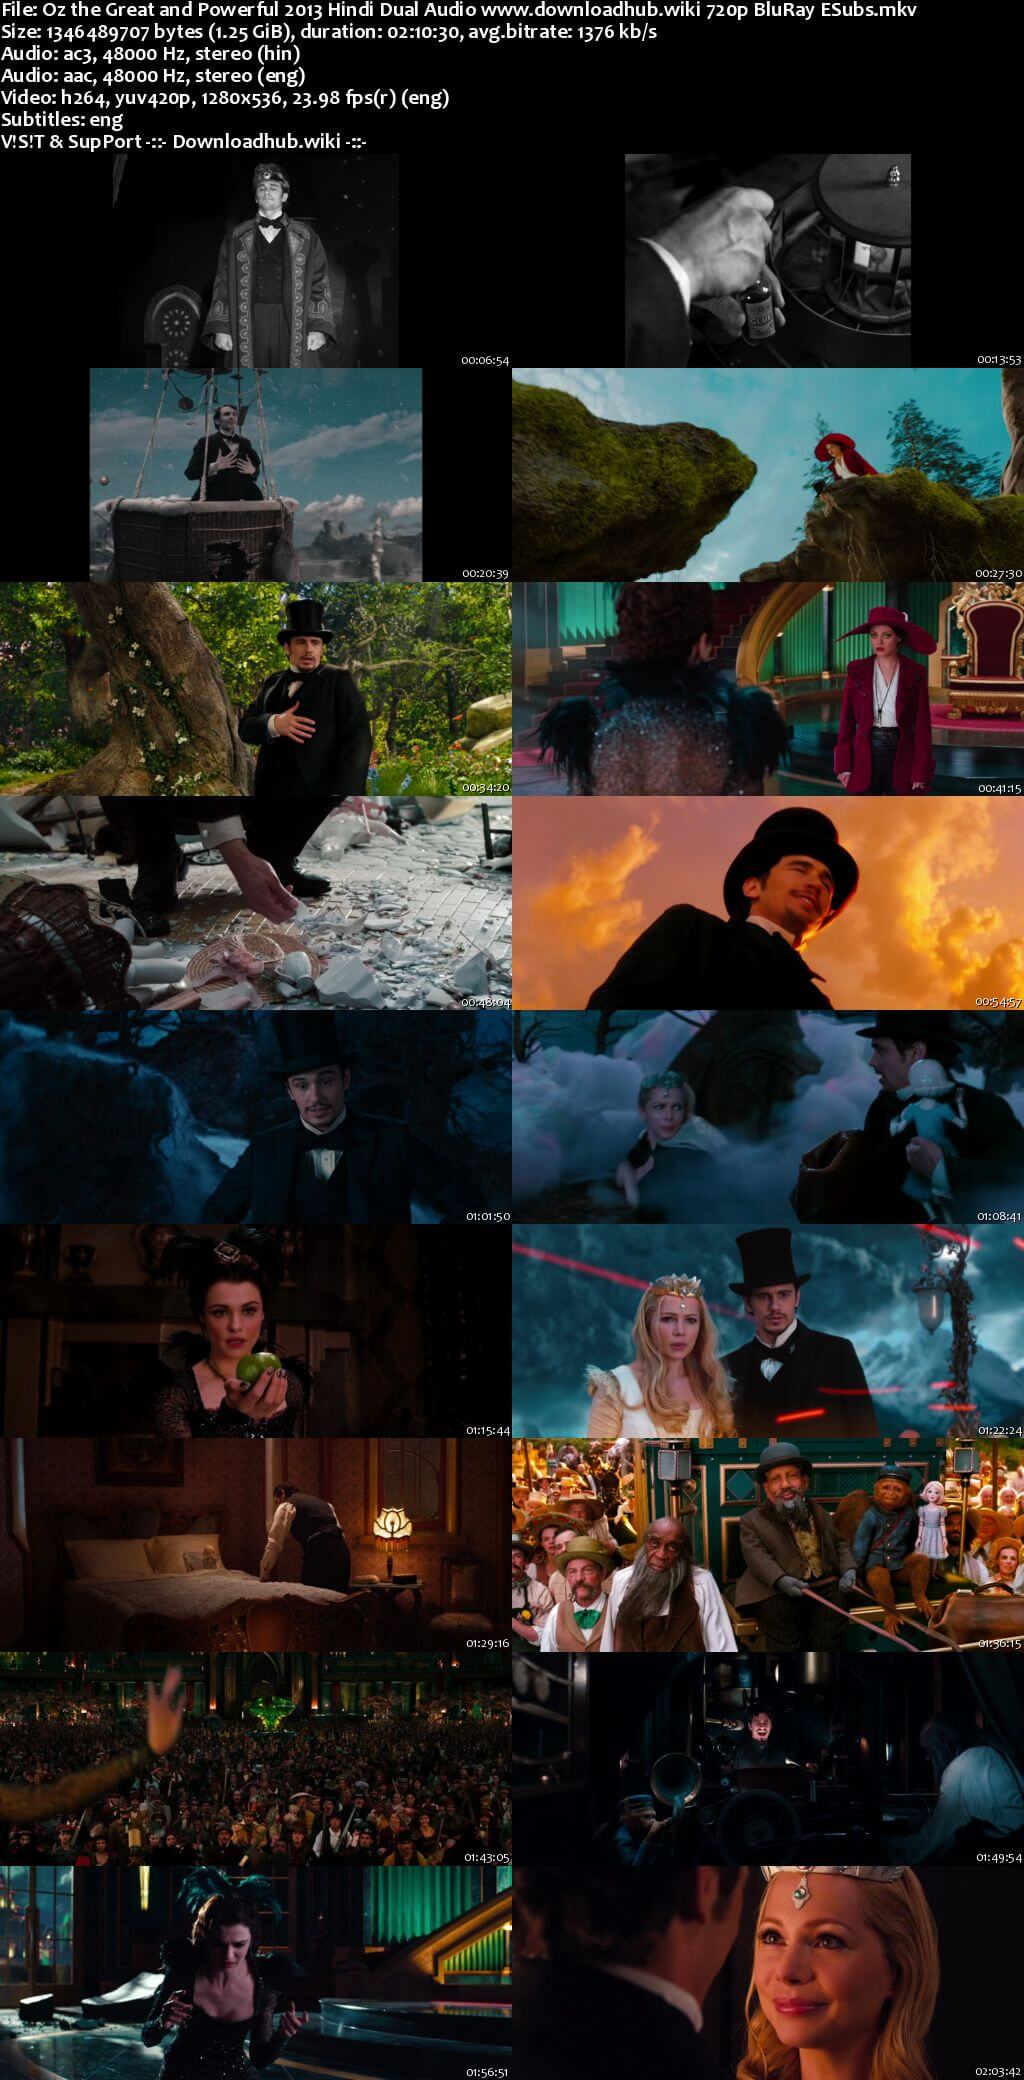 Oz the Great and Powerful 2013 Hindi Dual Audio 720p BluRay ESubs